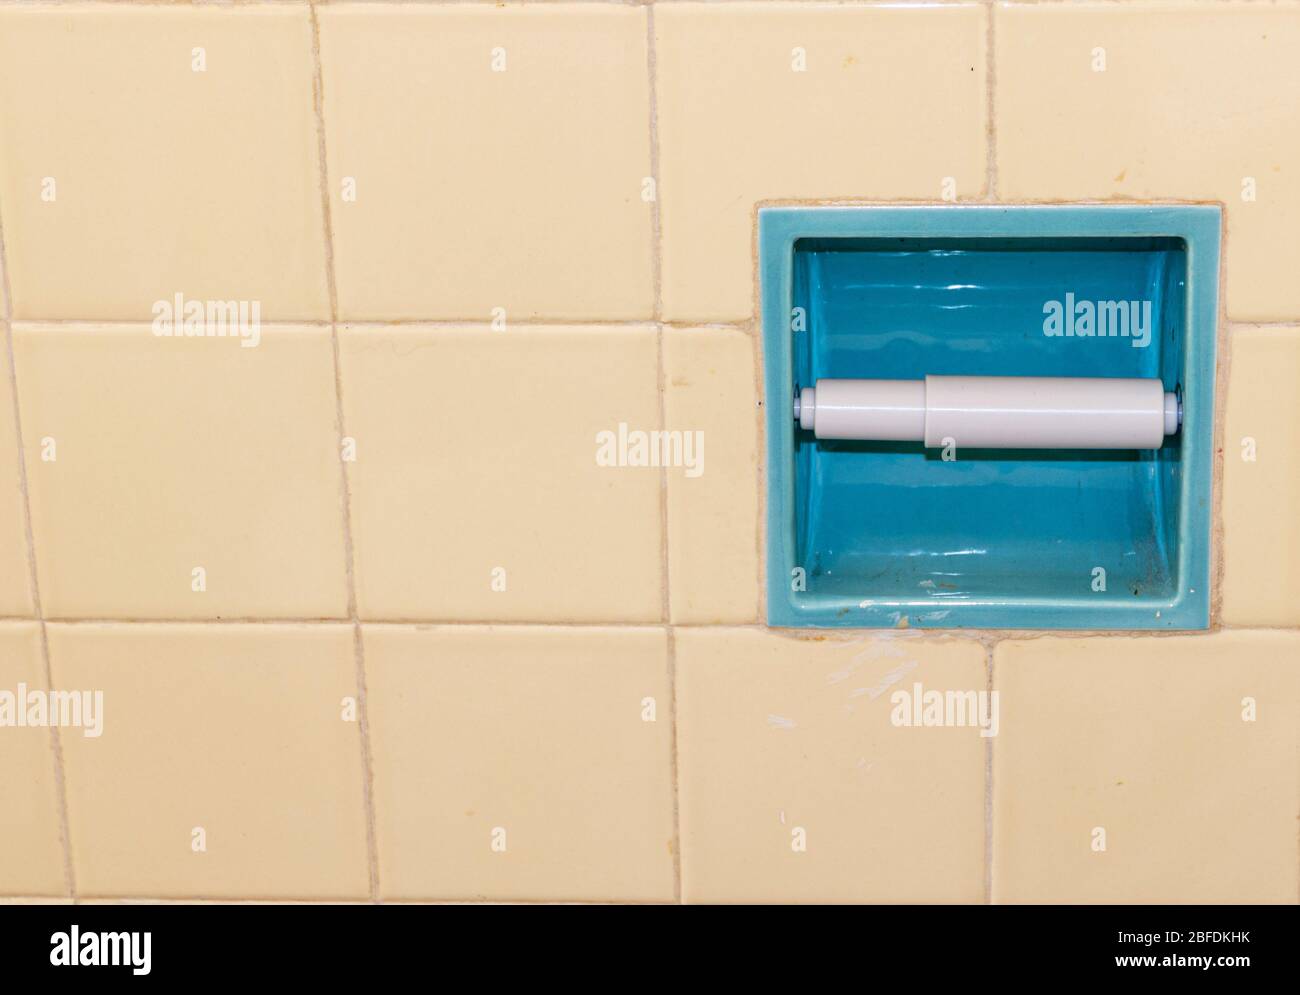 A tiled bathroom wall with an empty toilet paper holder due to hording during the coronavirus outbreak. Stock Photo